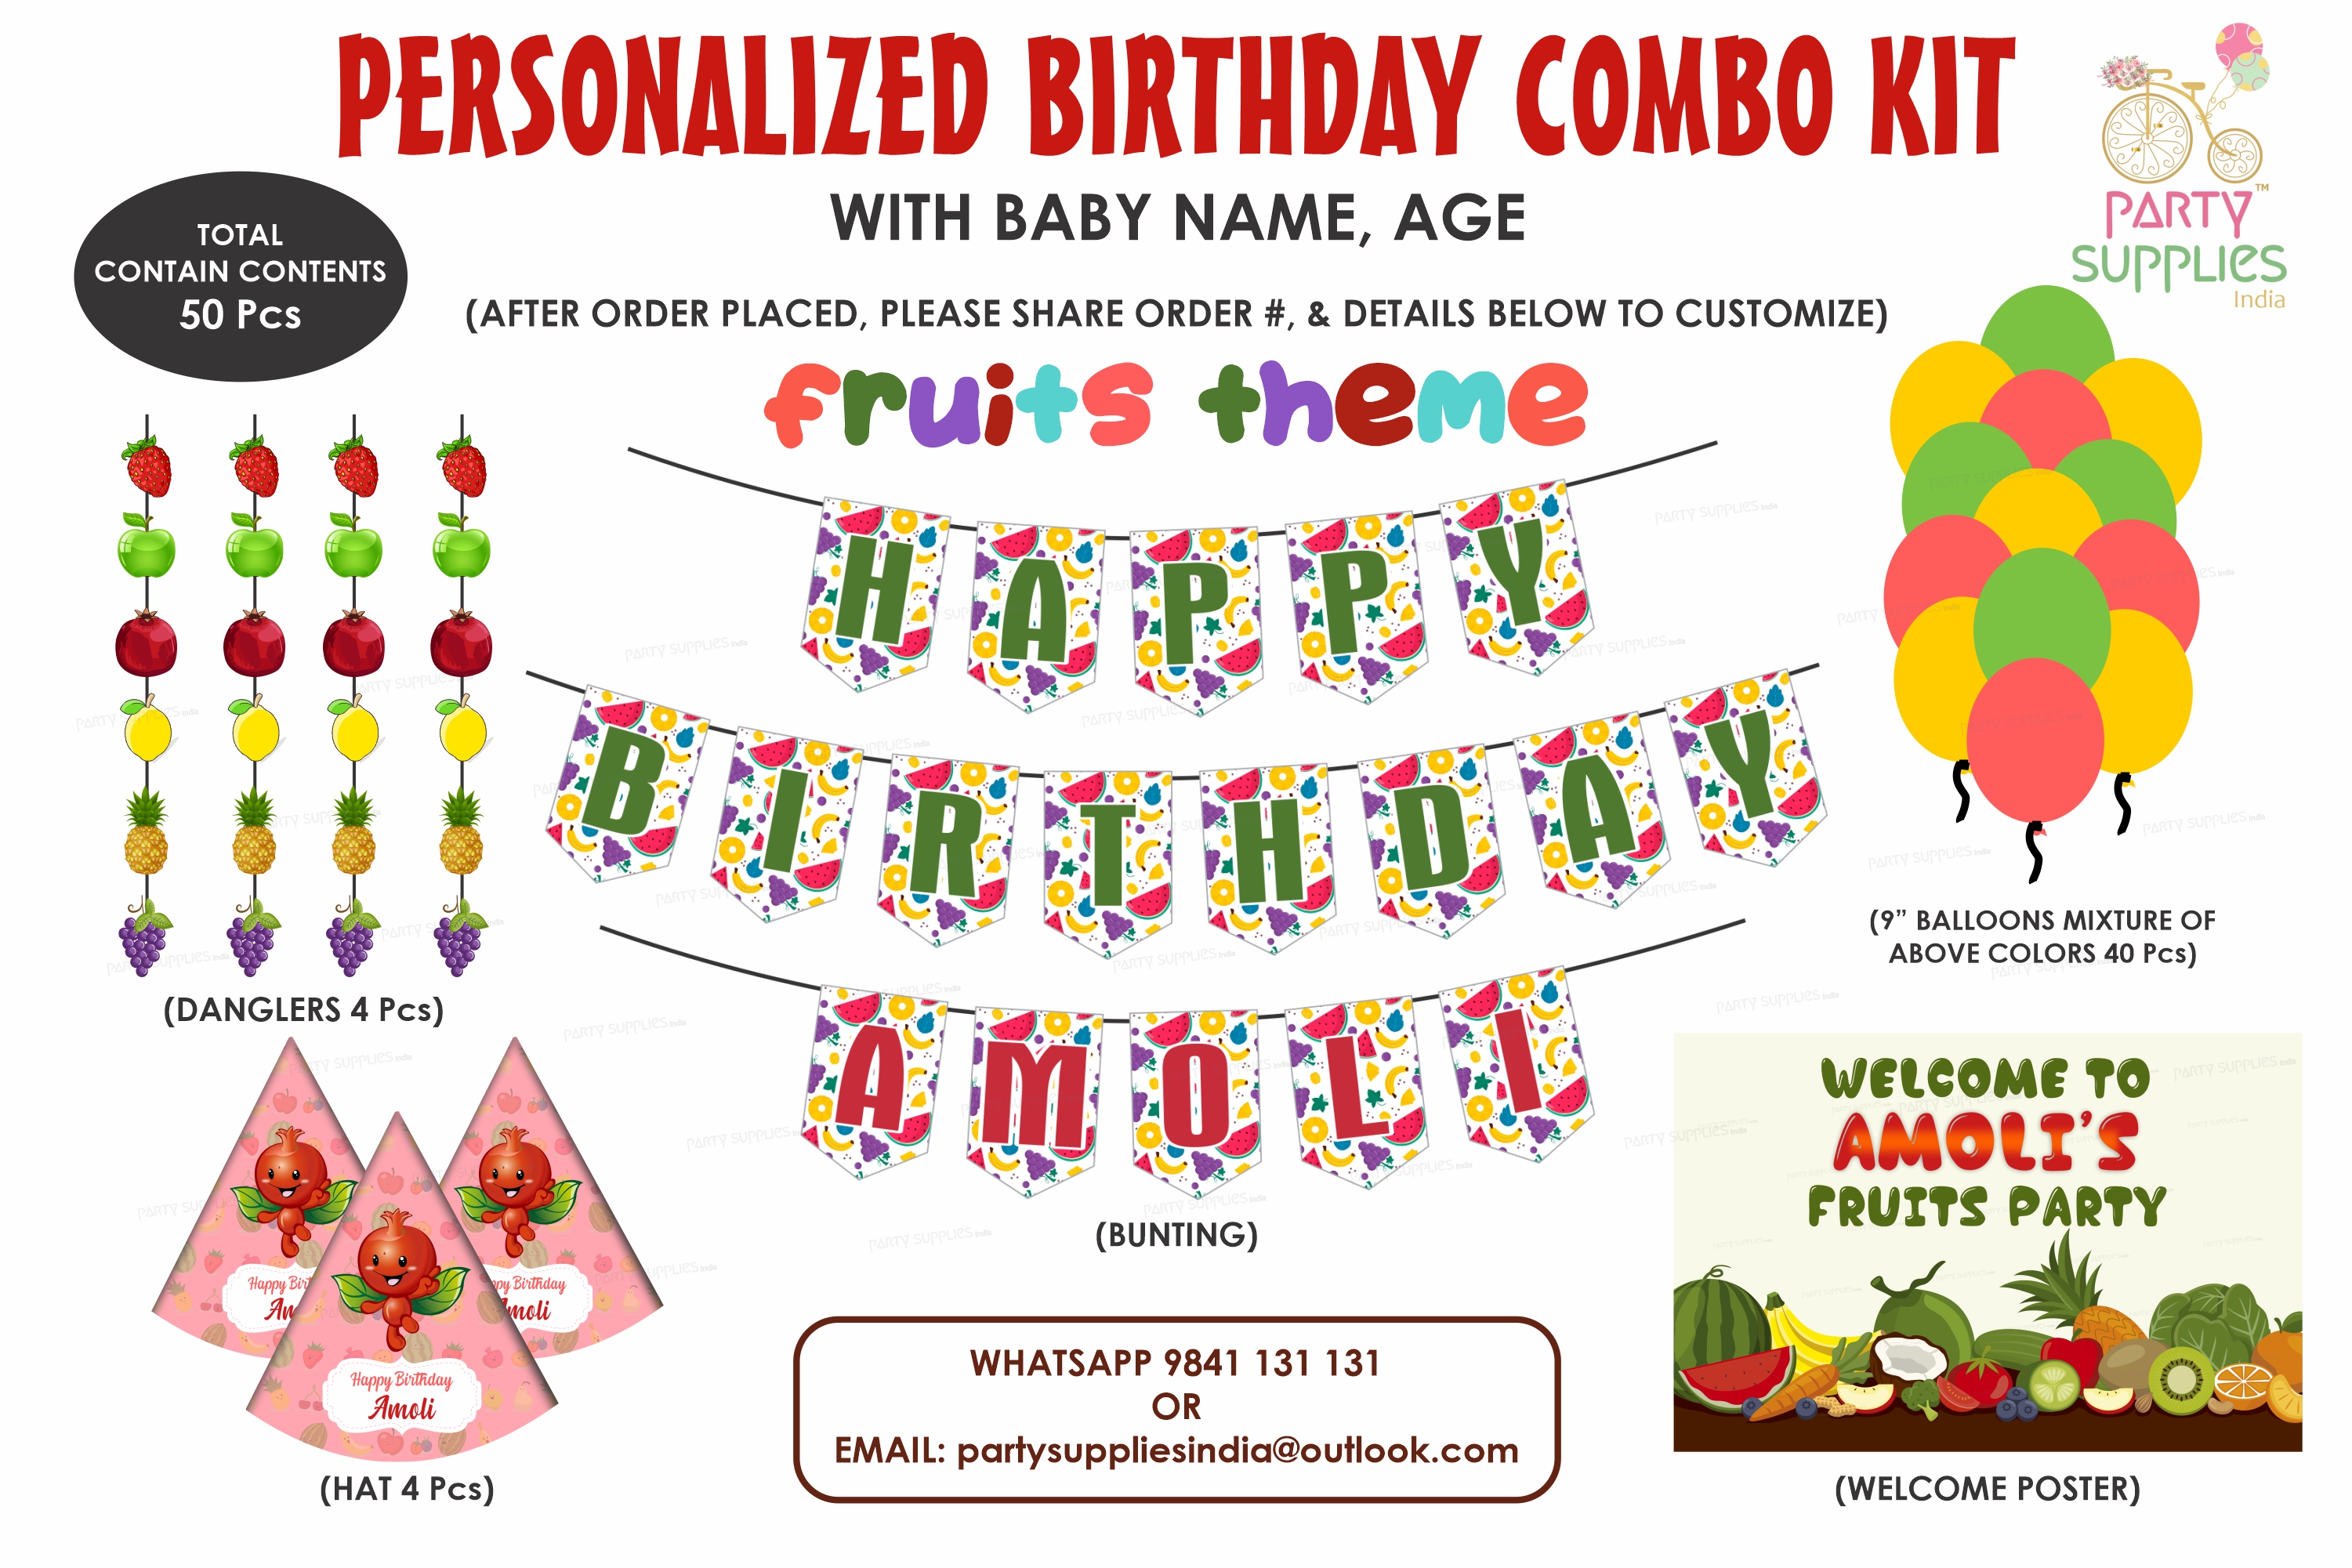 2nd birthday party themes for baby boyServicesBusiness OffersAll Indiaother